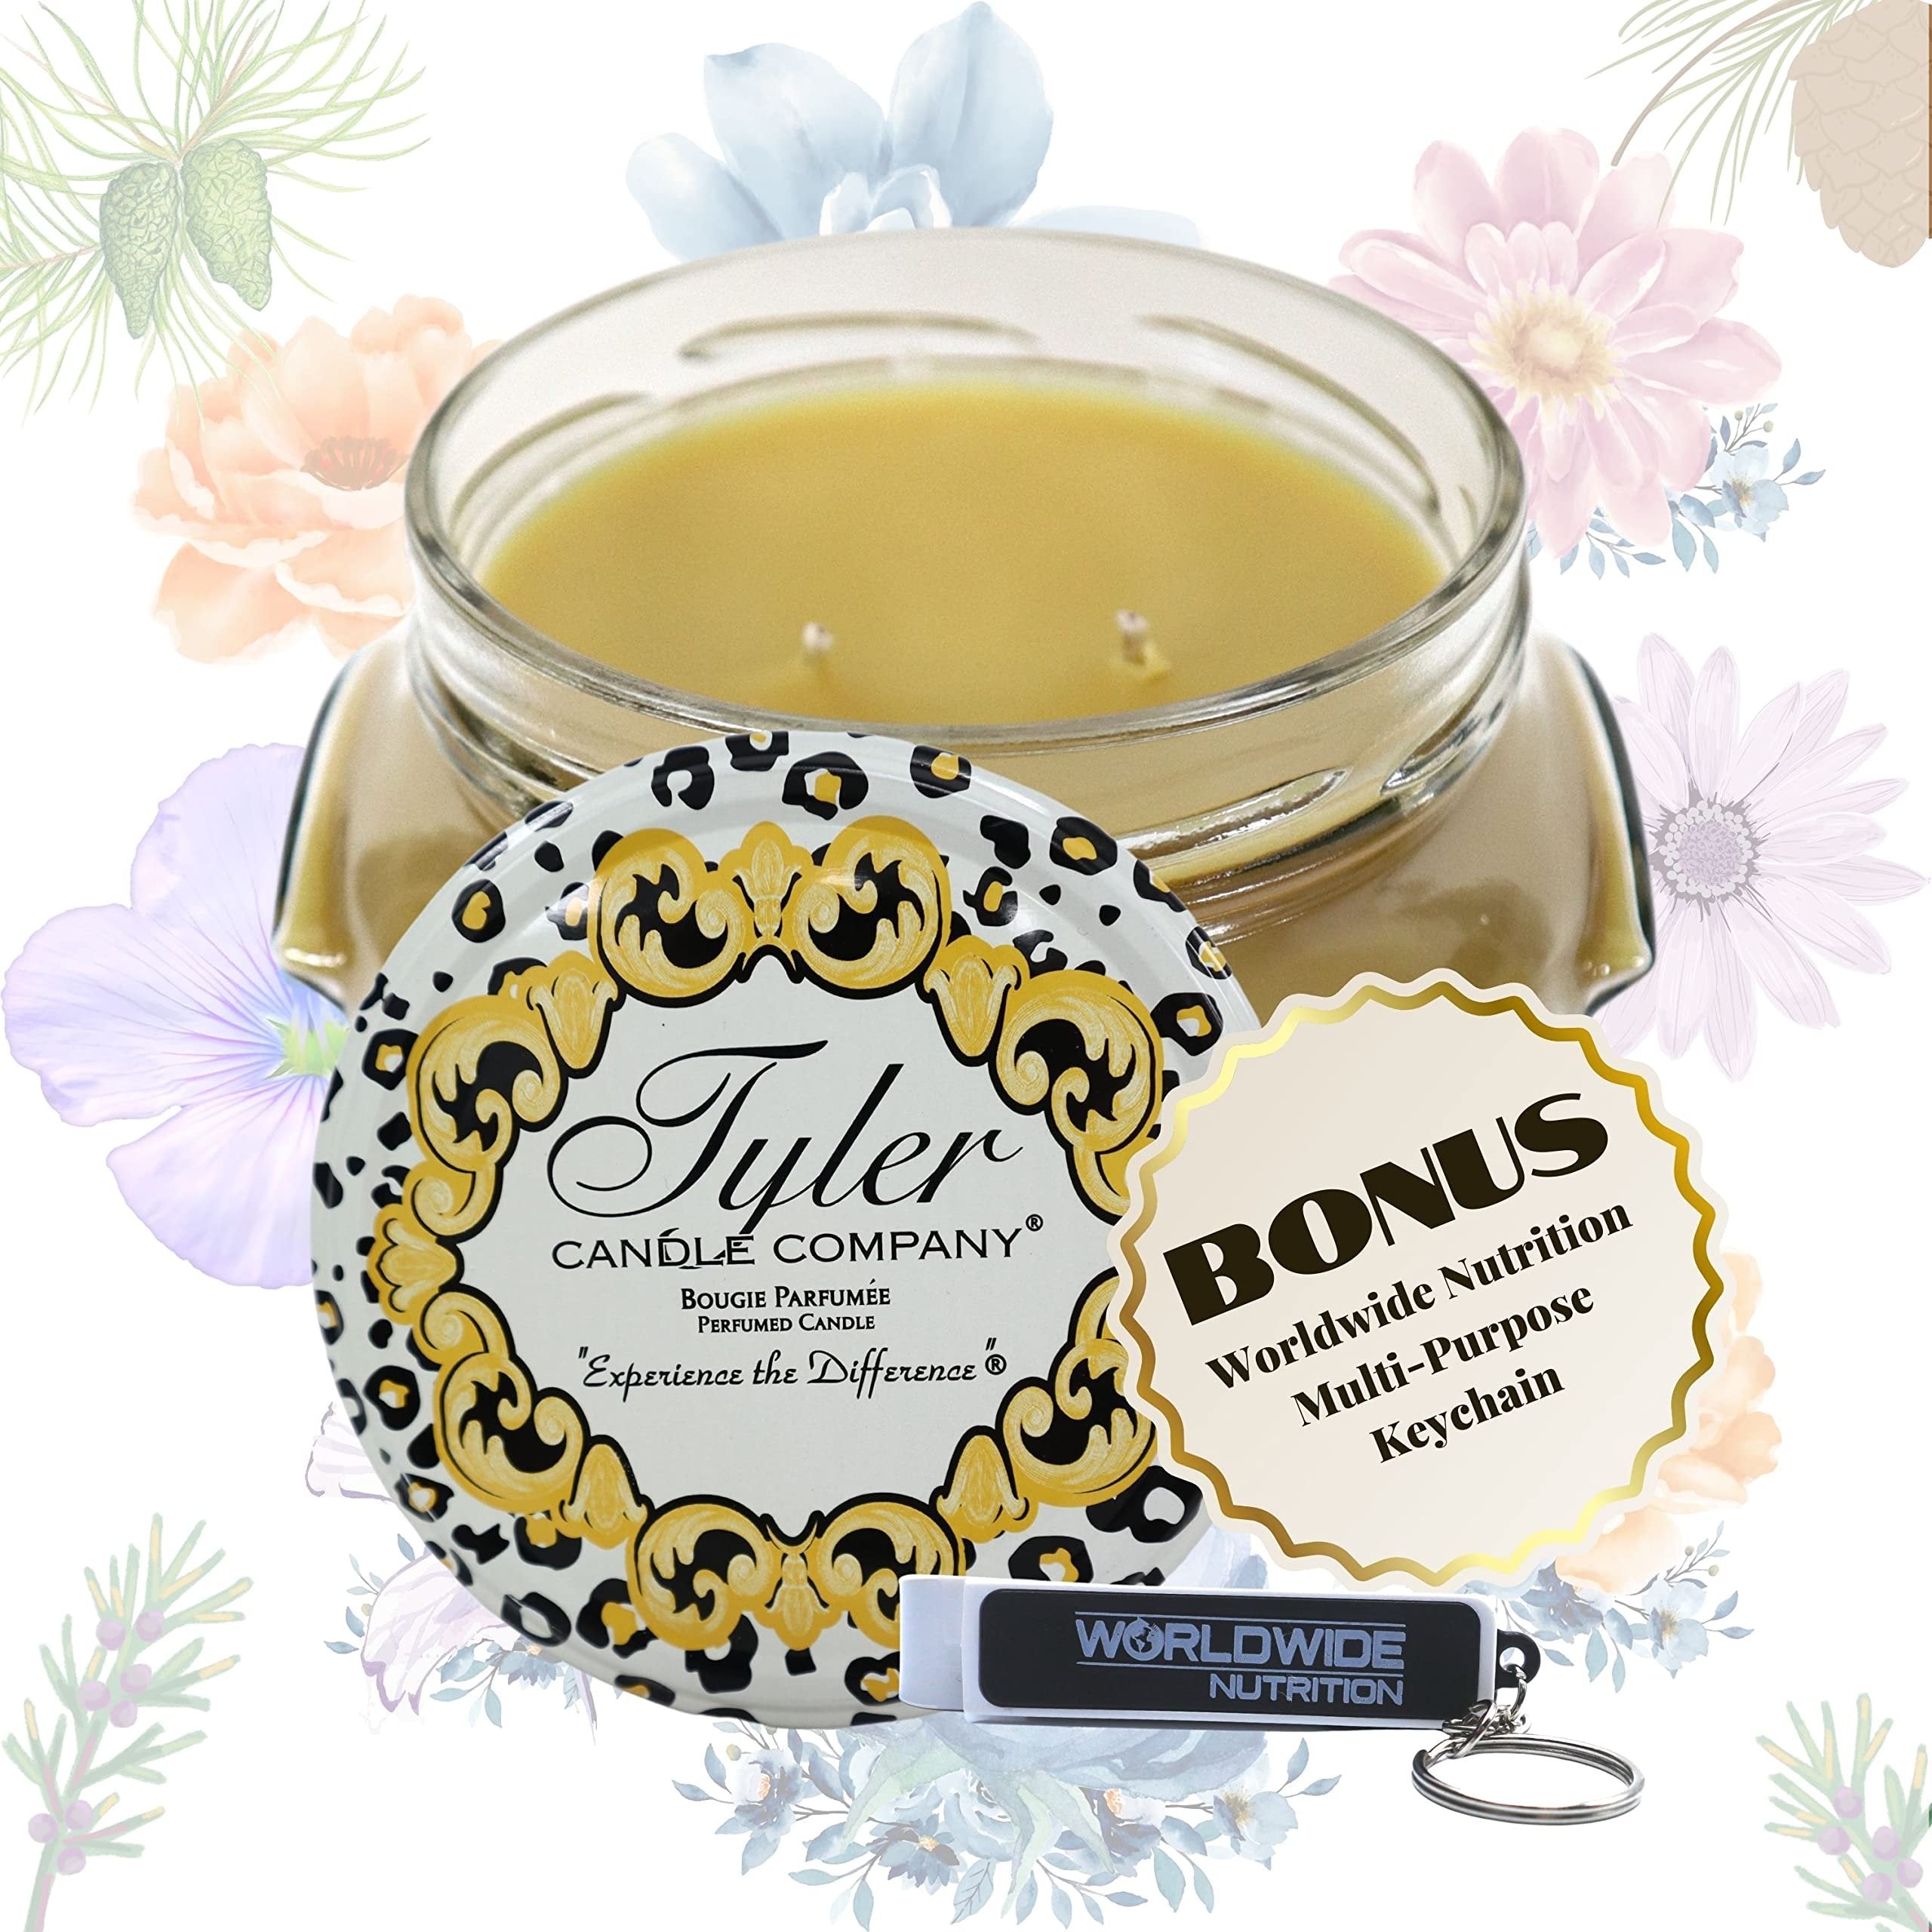 Tyler Candle Company Trophy Scent Jar Candle - Luxurious Scented Candle with Essential Oils - Long Burning Candles 110-120 Hours - Large Candle 22 oz with Bonus Key Chain